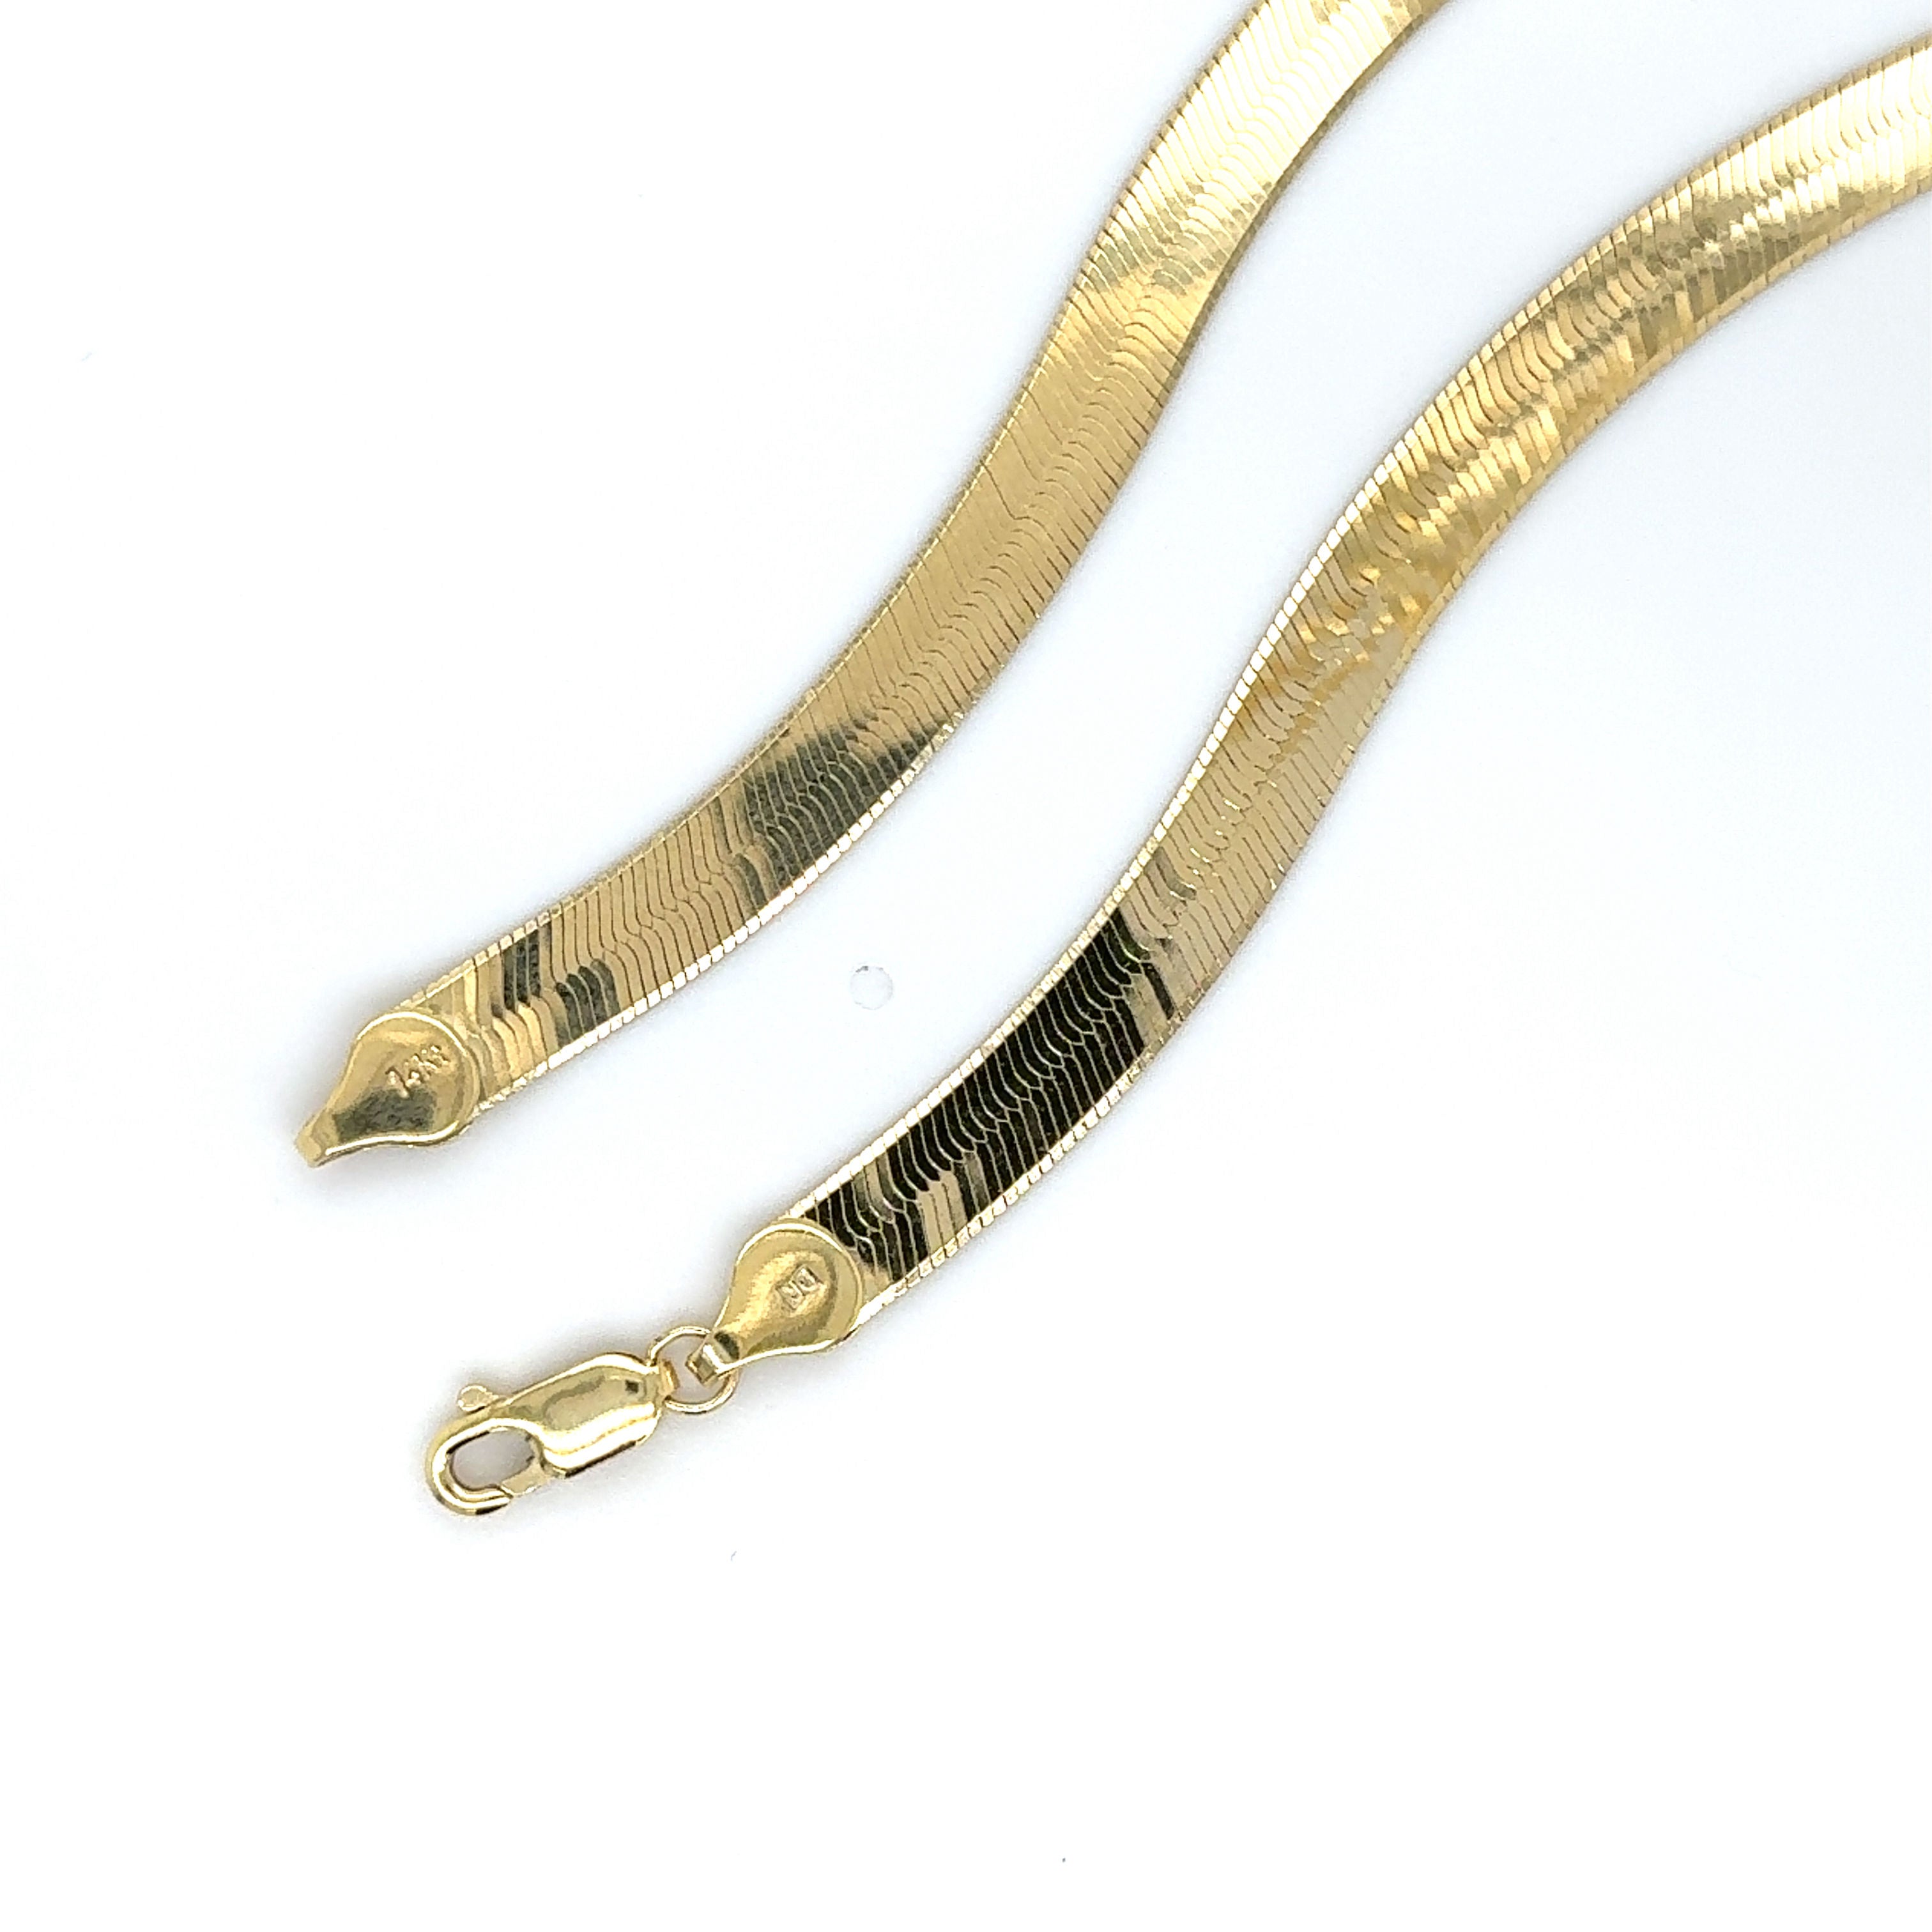 14K Solid Yellow Gold Herringbone Chain Necklace 6 mm Thick Women